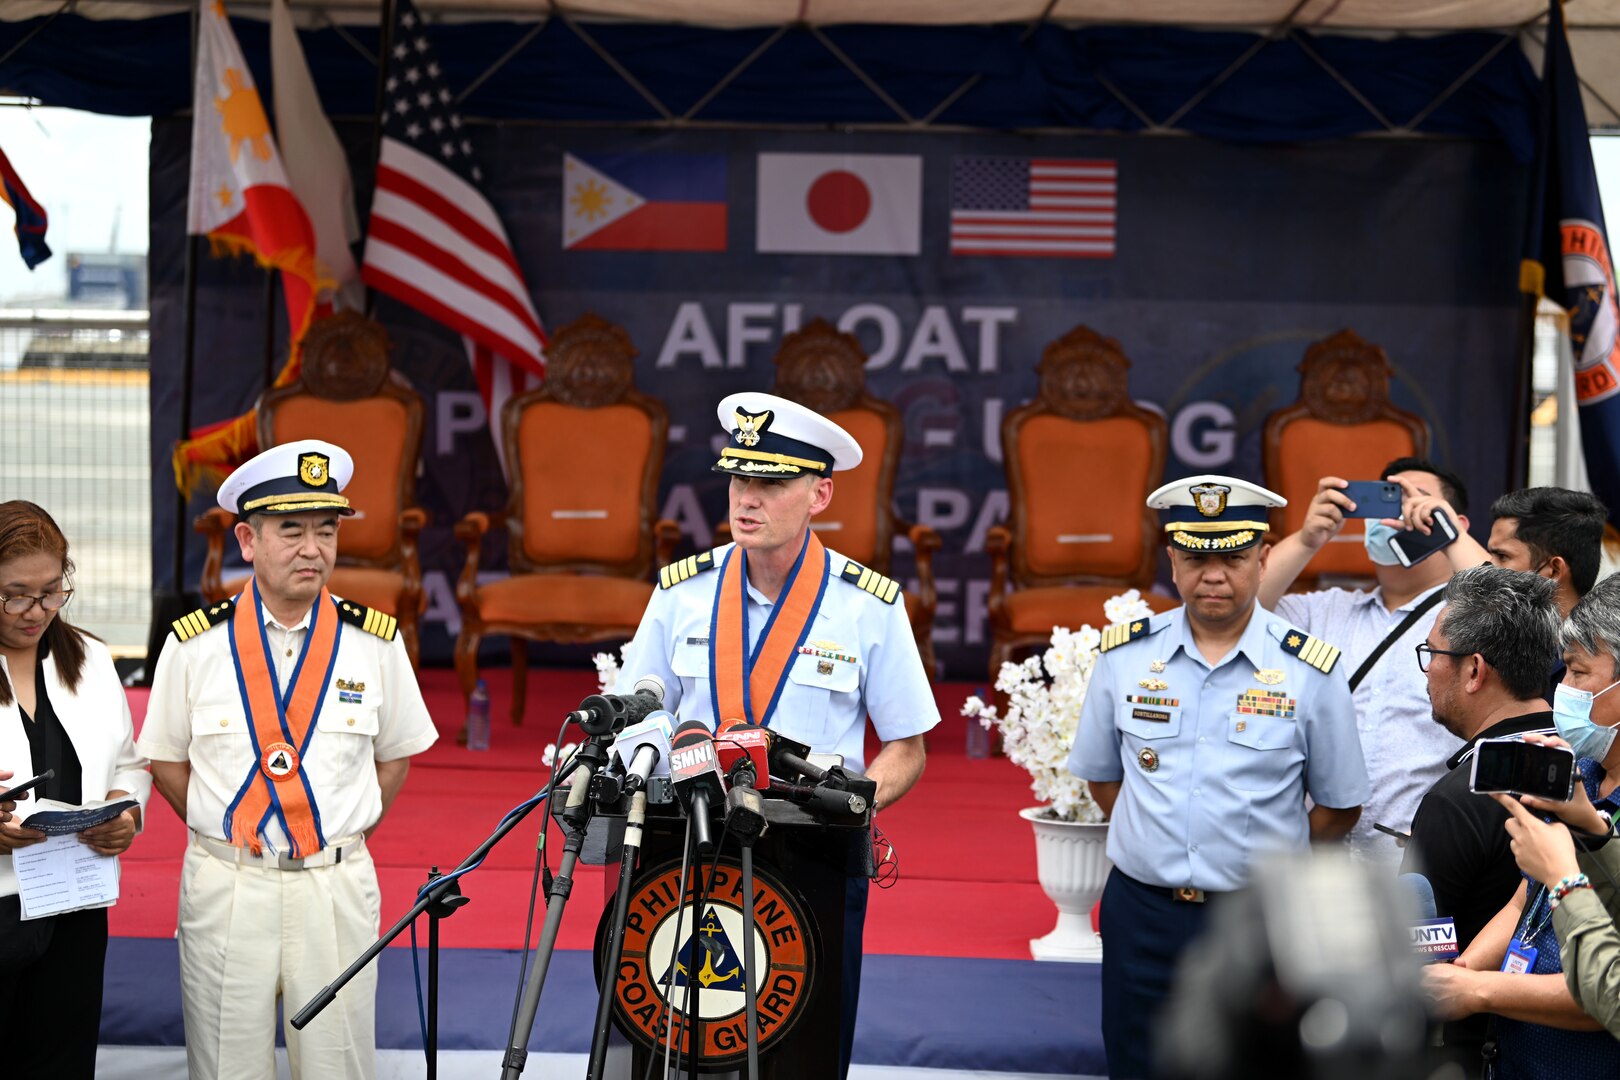 Capt. Brian Krautler, commanding officer of U.S. Coast Guard Cutter Stratton (WMSL 752), addresses the media following Stratton’s arrival to Manila, Philippines, for a tri-lateral engagement with the Philippine and Japan Coast Guards, June 1, 2023. Stratton deployed to the Western Pacific under U.S. Navy 7th Fleet command to serve as a non-escalatory asset for the promotion of a rules-based order in the maritime domain by engaging with partner nations and allies in the region. (U.S. Coast Guard photo by Chief Petty Officer Matt Masaschi)